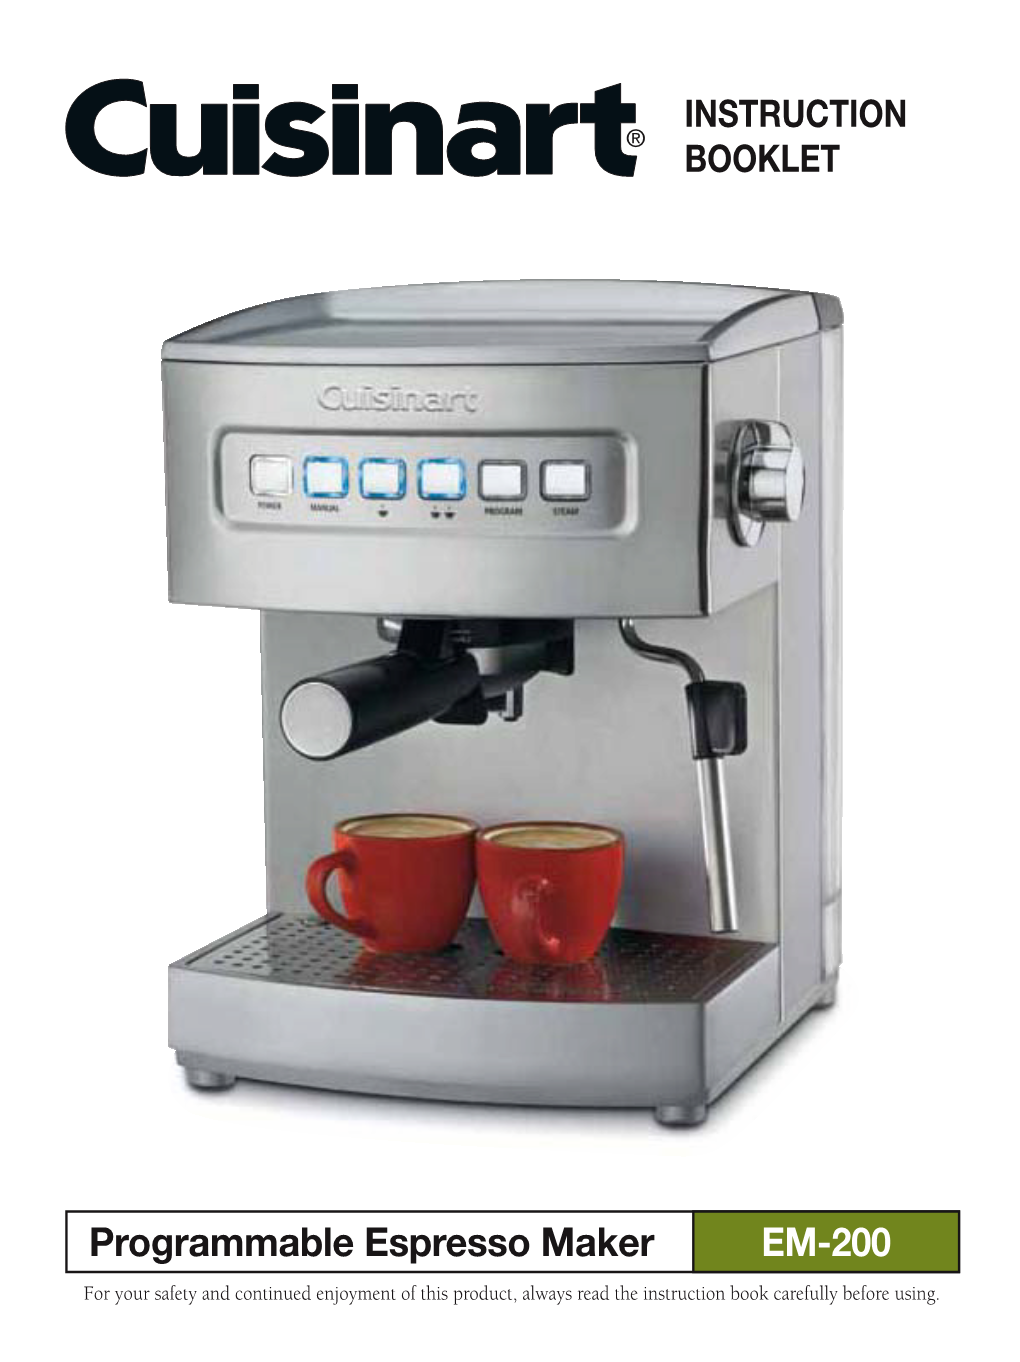 Programmable Espresso Maker EM-200 for Your Safety and Continued Enjoyment of This Product, Always Read the Instruction Book Carefully Before Using